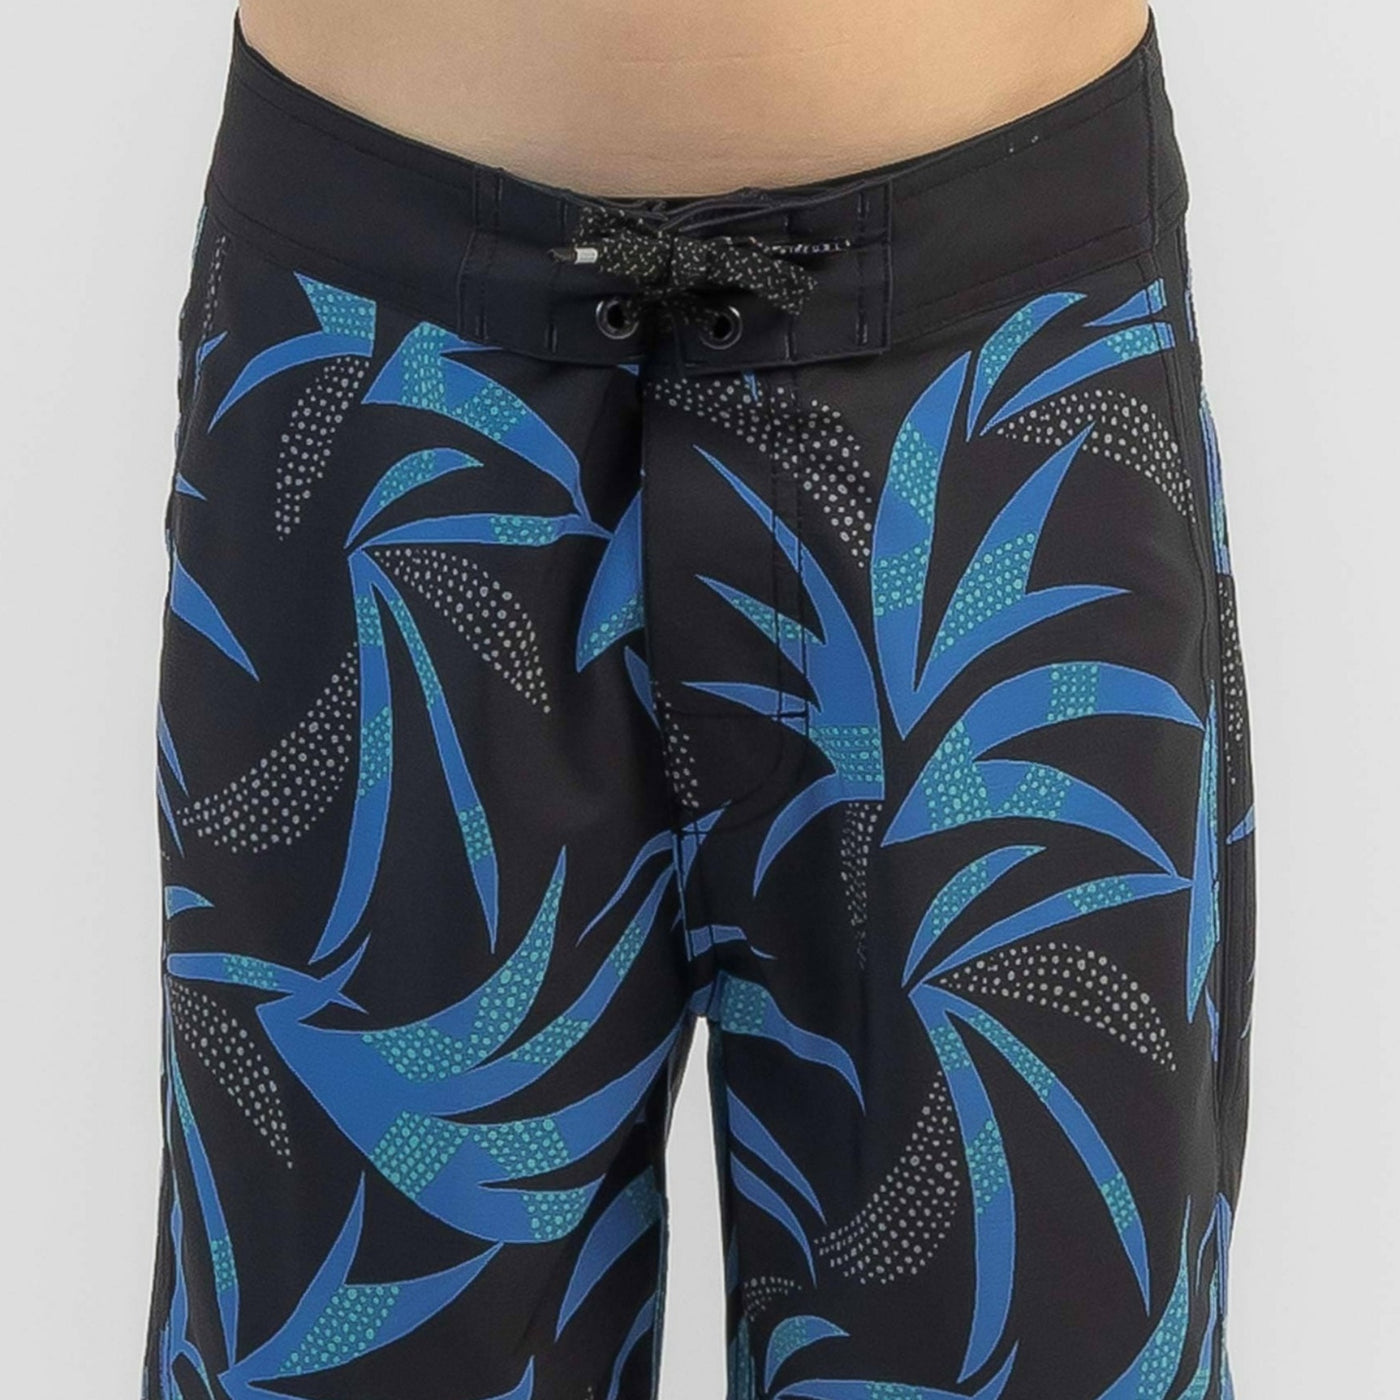 Rip Curl Boys Mirage Angourie Floral Boardshorts